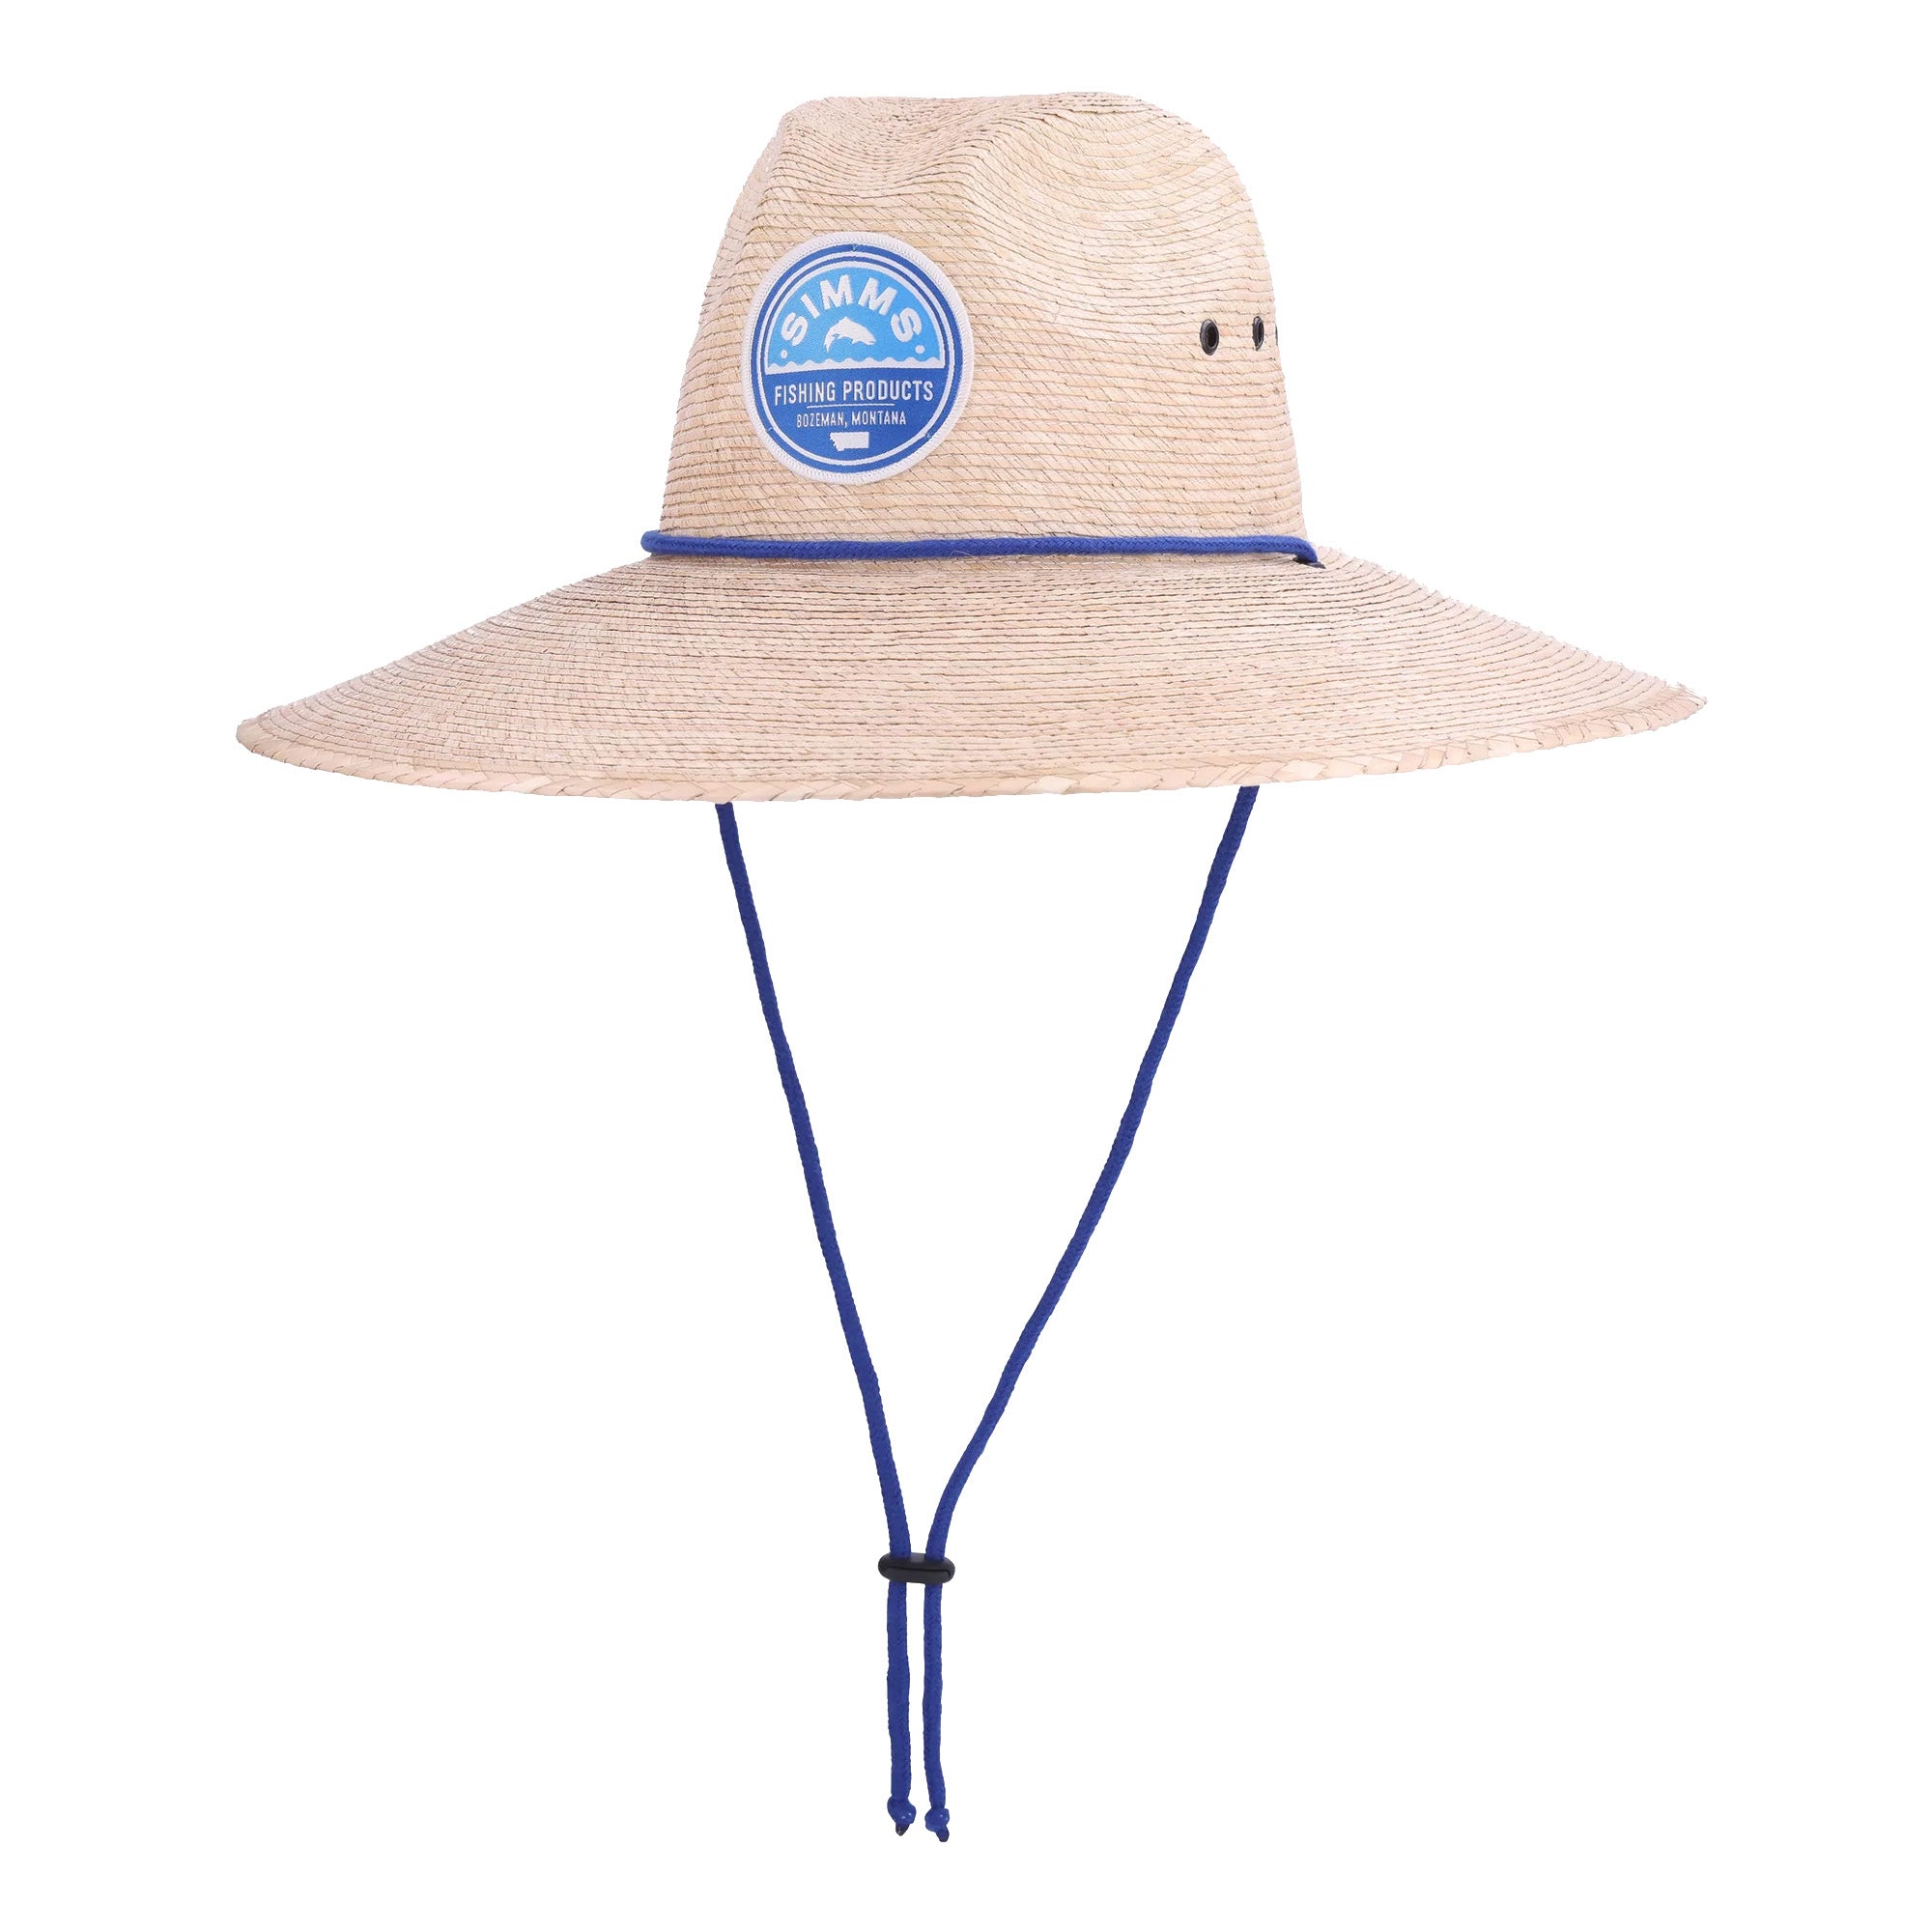 Hats and Headwear for Anglers